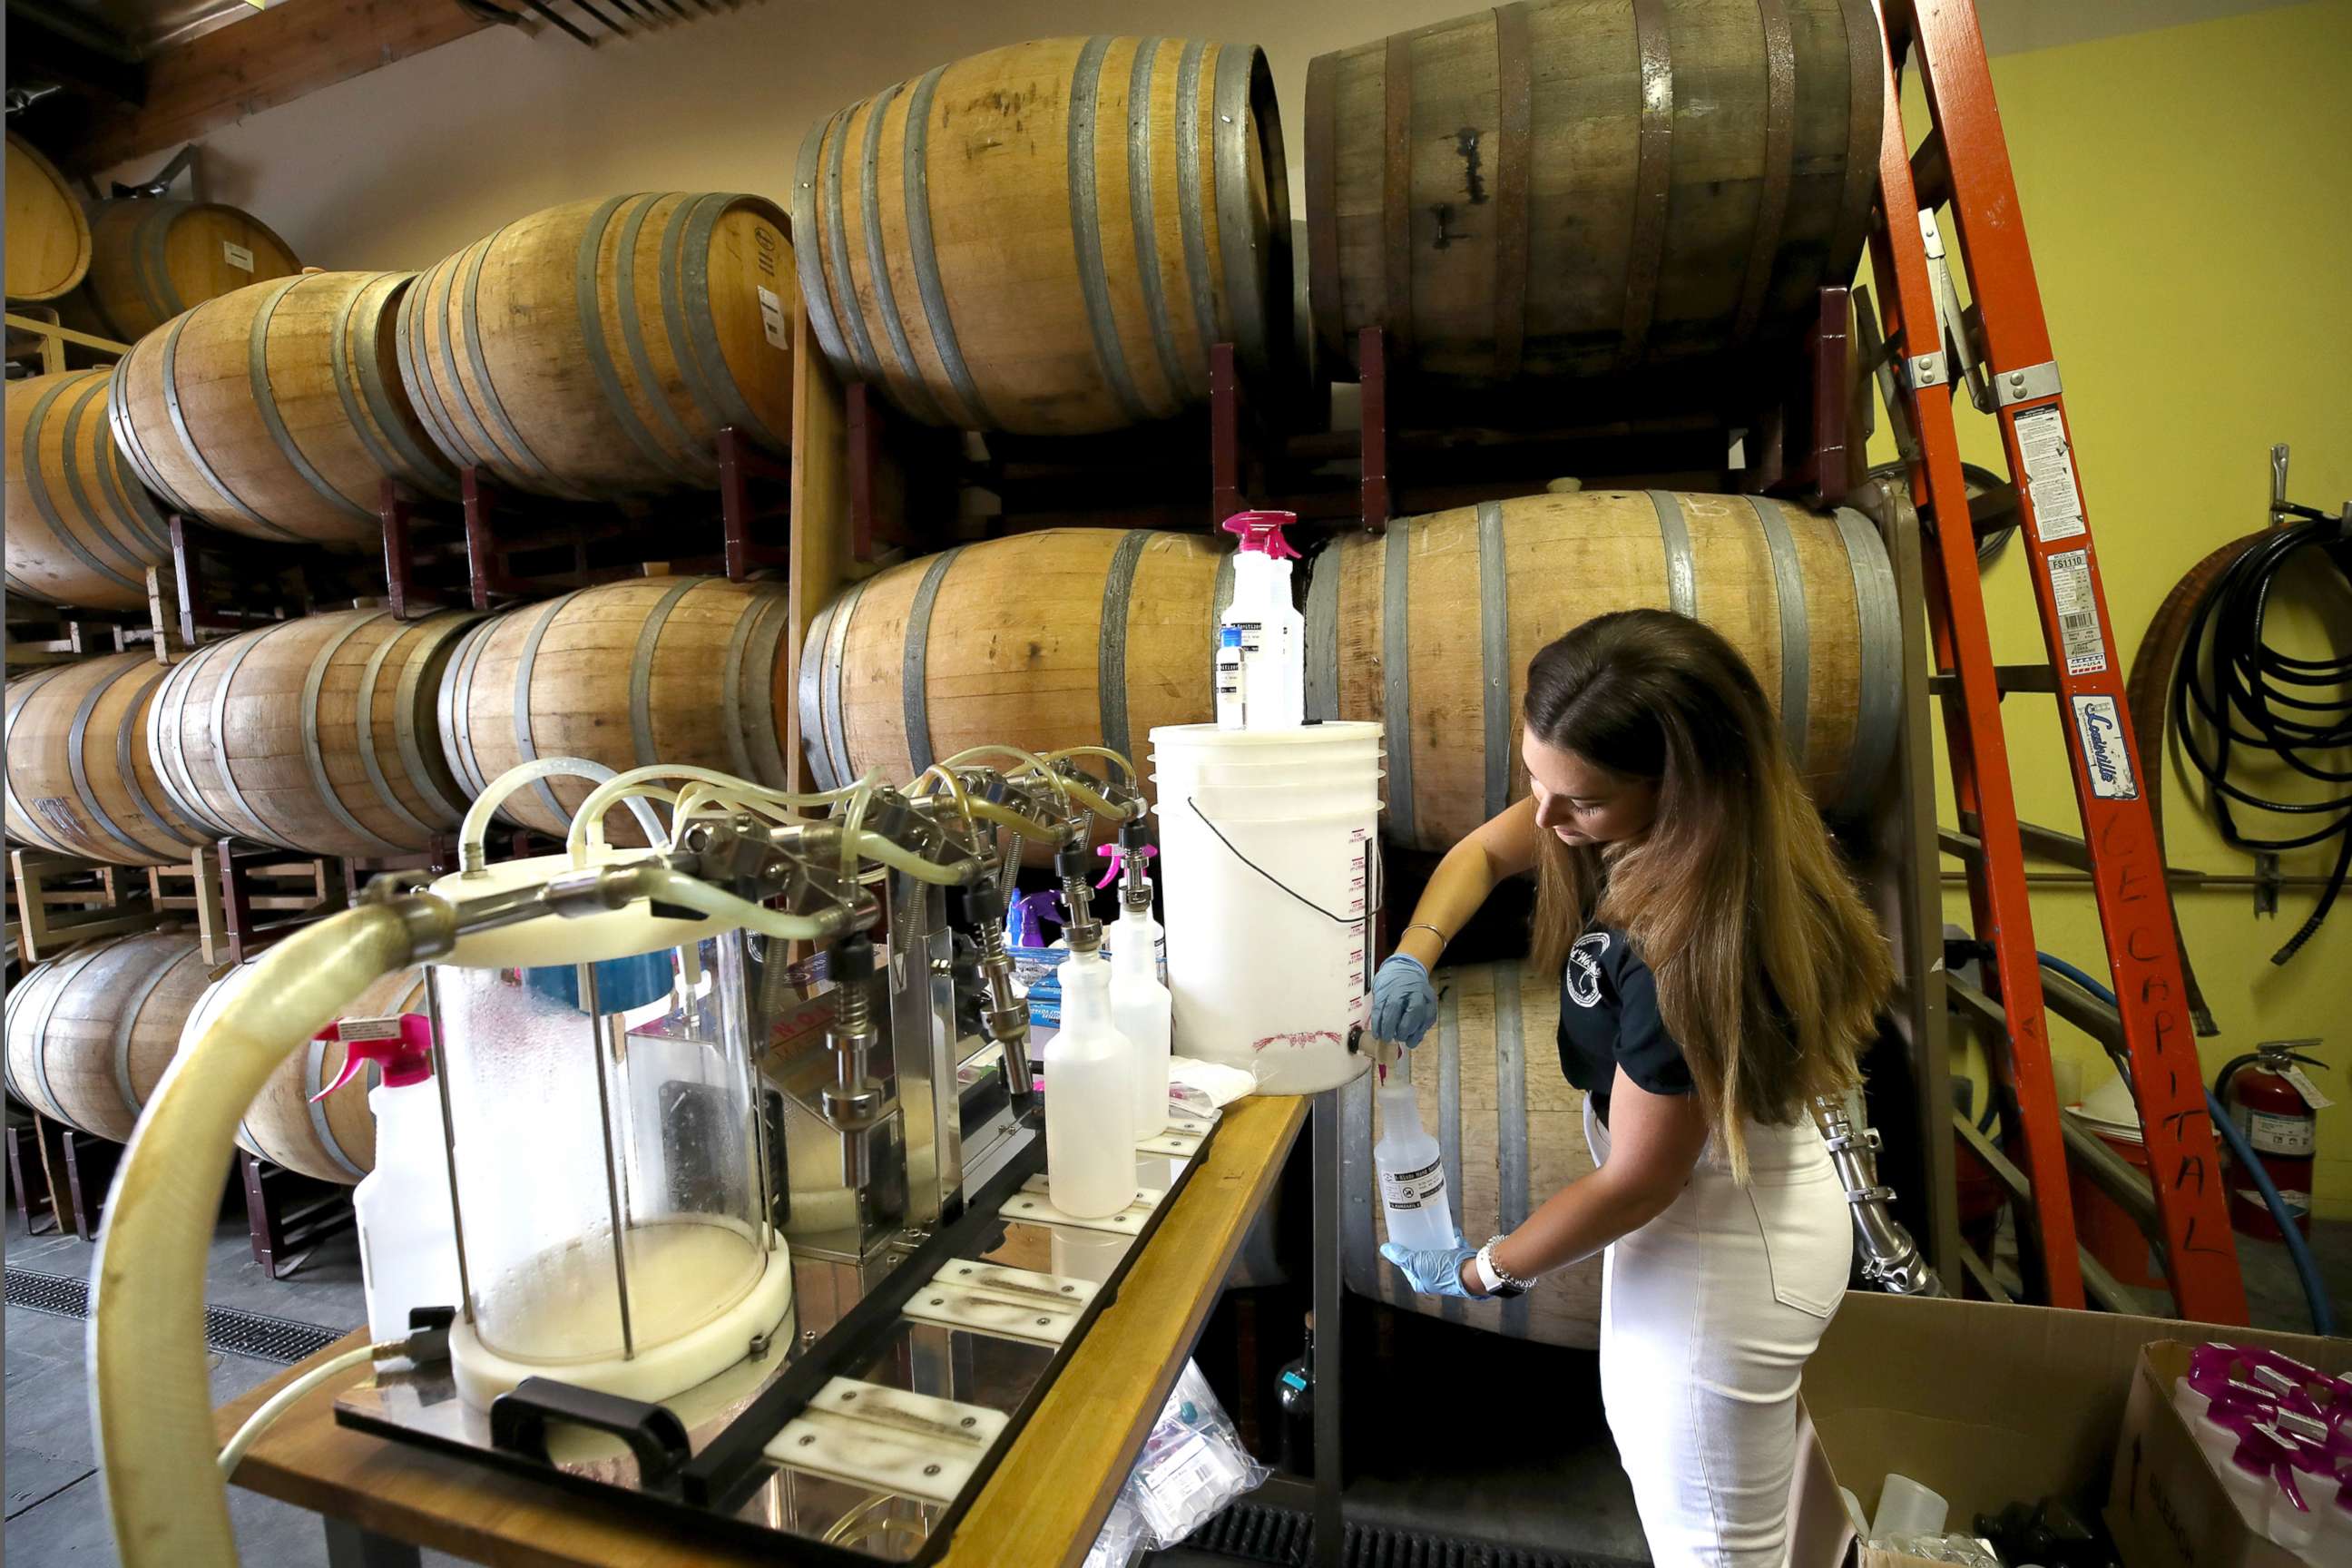 PHOTO: Ivana Kucan fills bottles with hand sanitizer at Old World Spirits during the coronavirus pandemic, March 27, 2020 in Belmont, Calif.